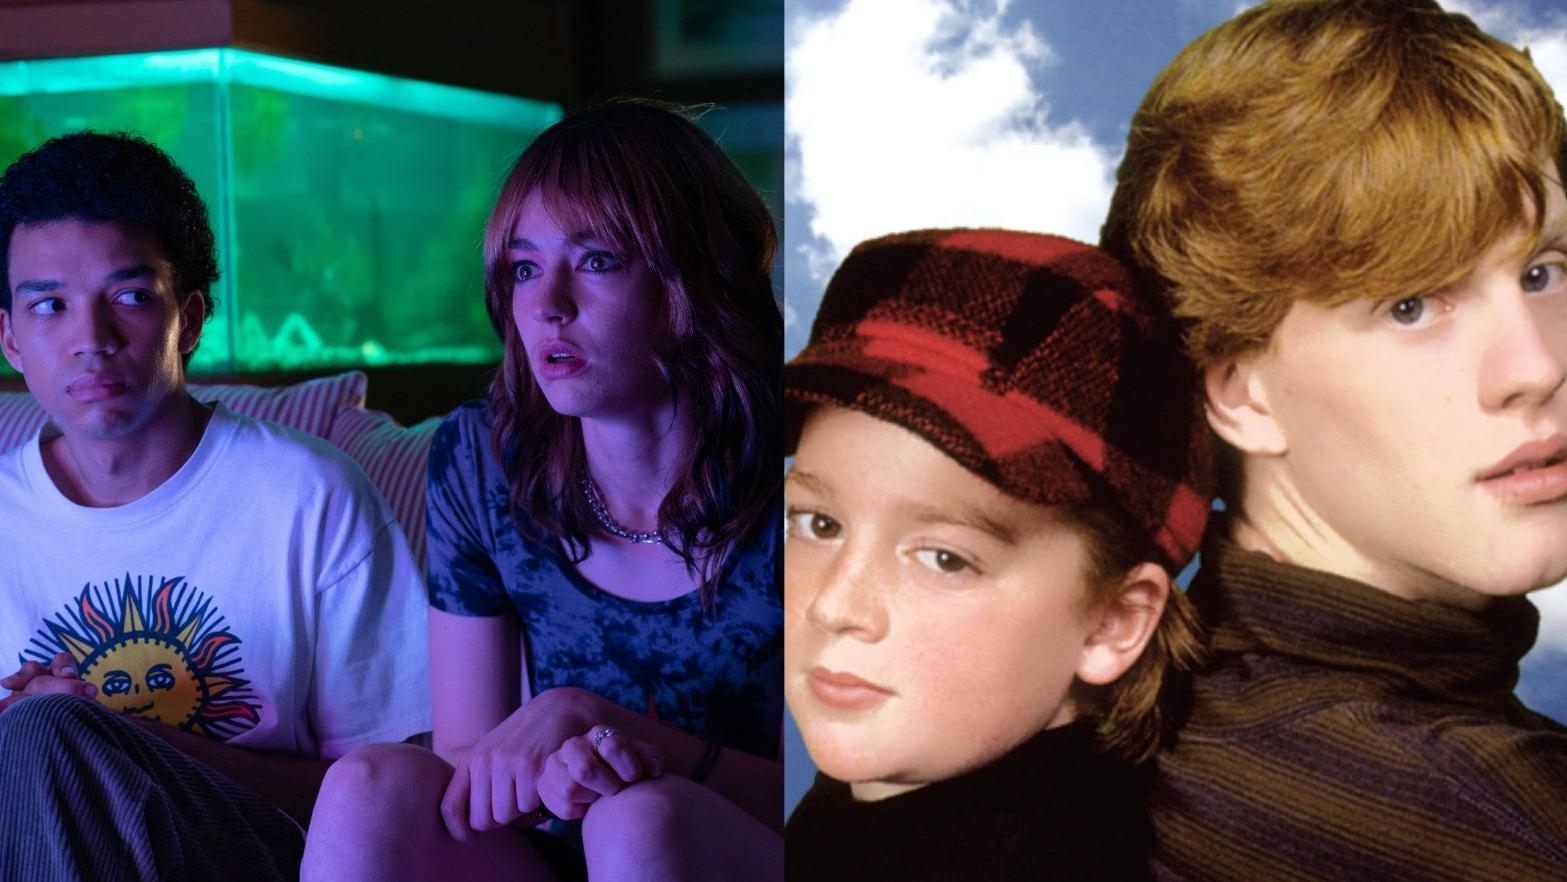 Beyond Buffy: I Saw The TV Glow channels the melancholy magic of The Adventures Of Pete & Pete